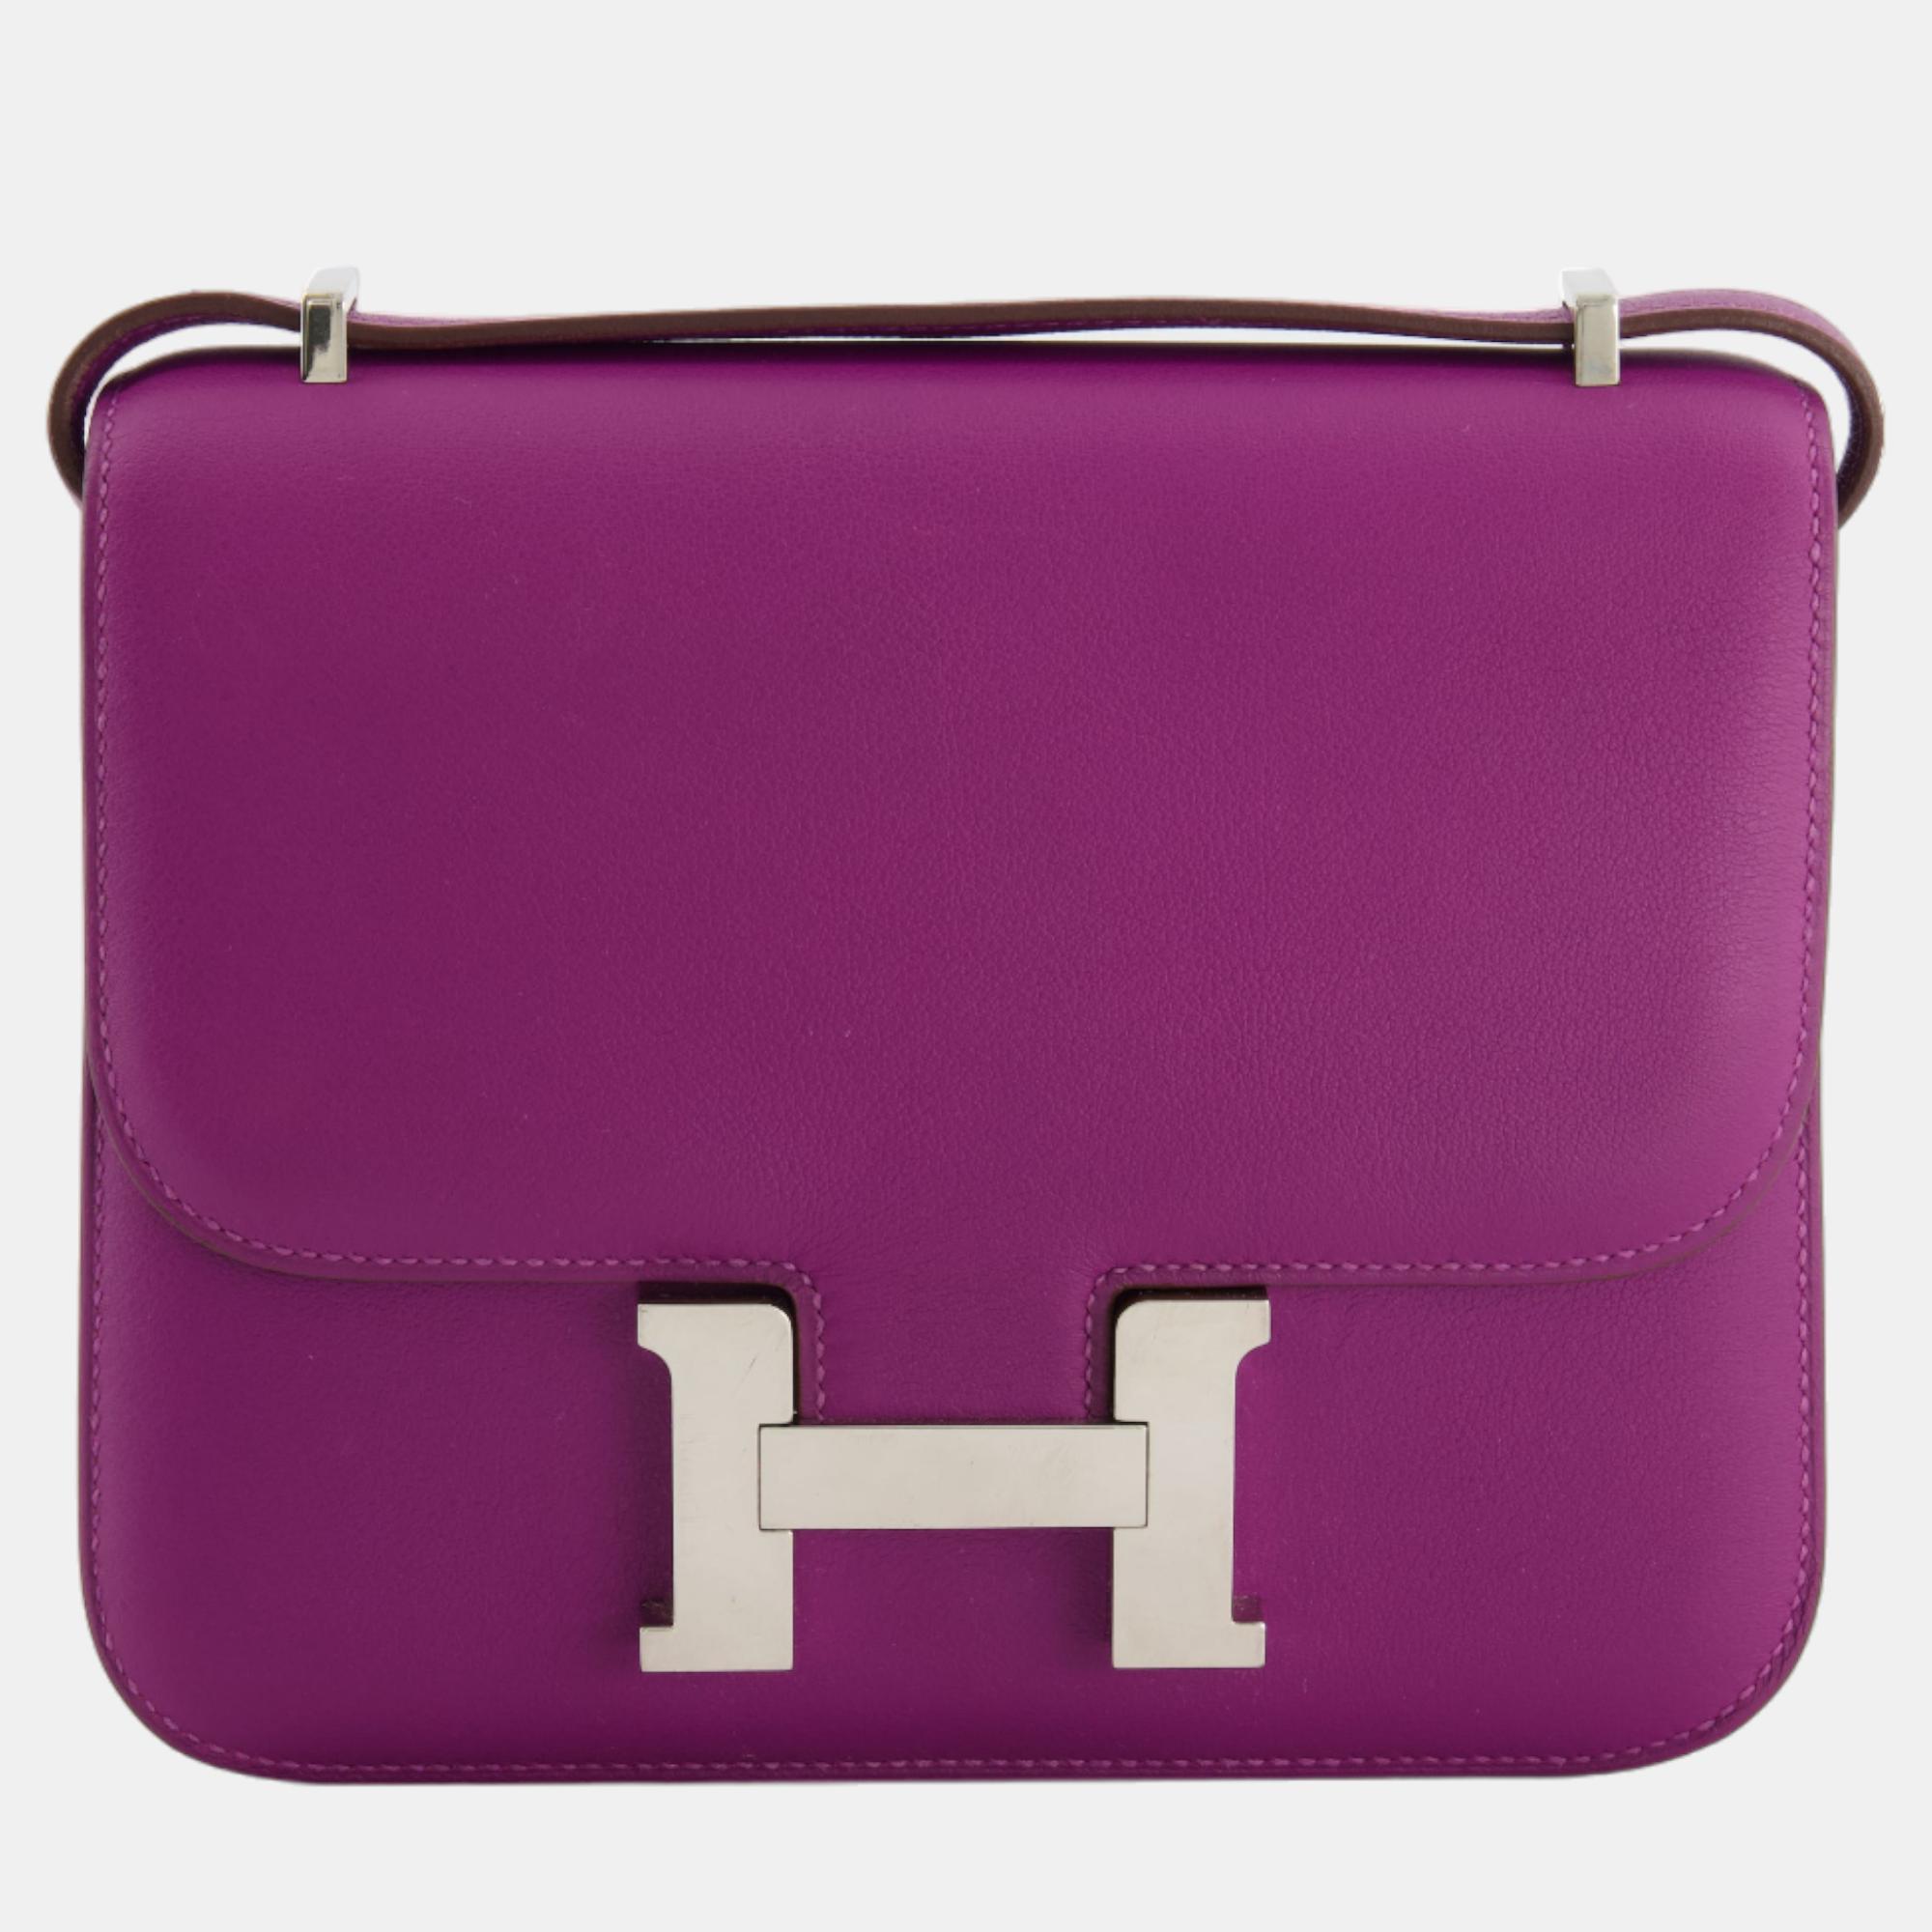 Hermes mini constance 18cm in anemone evercolor leather with palladium  hardware